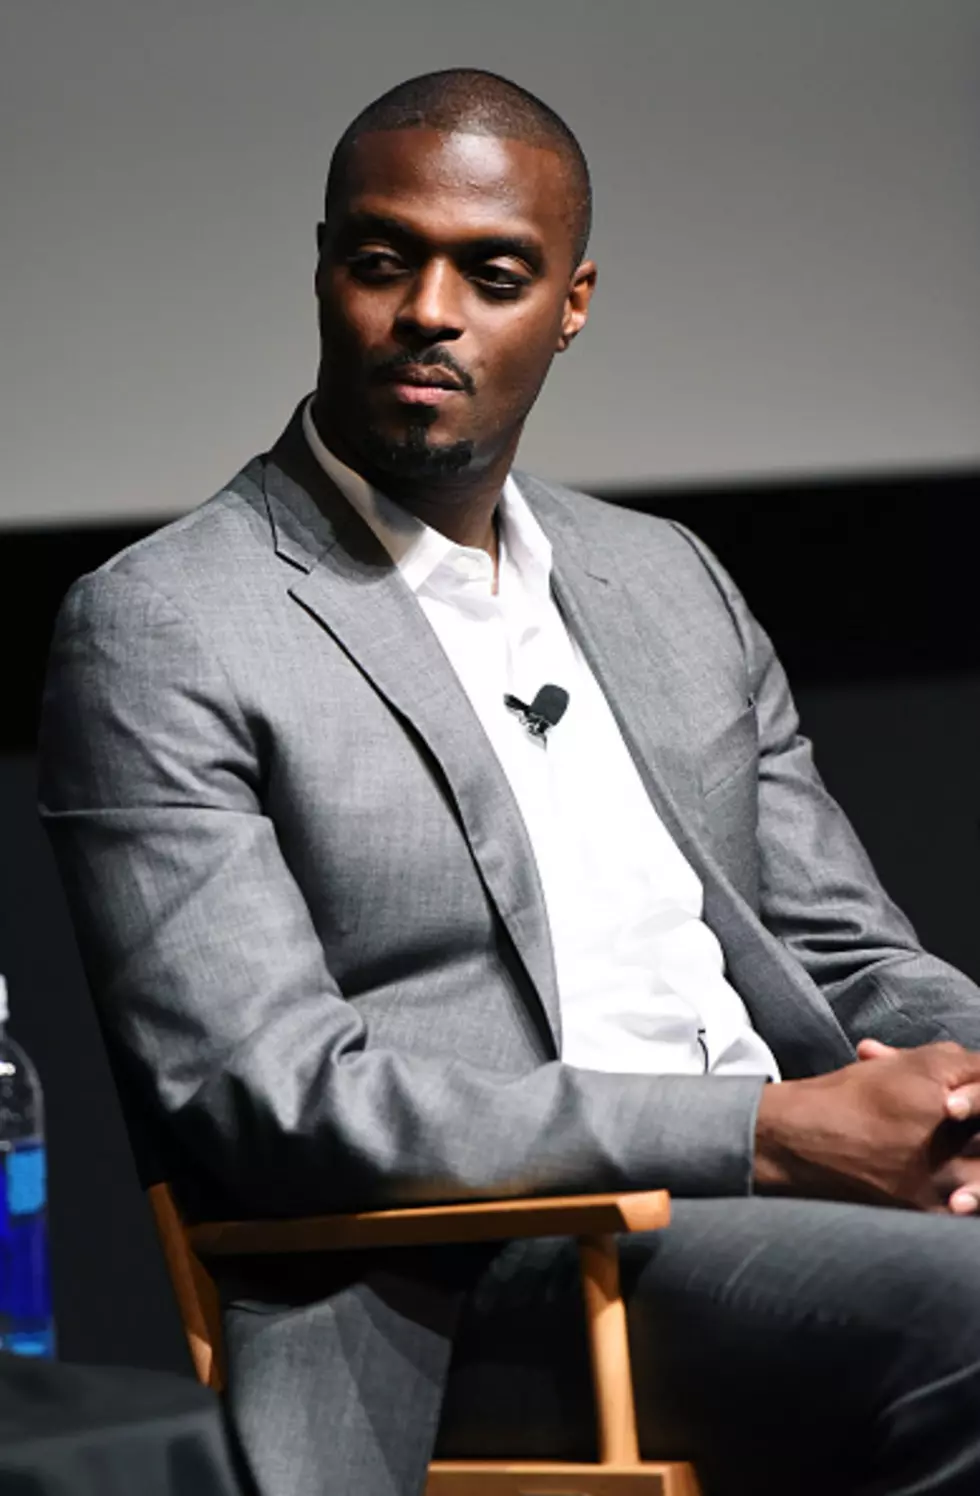 Plaxico Burress To Face Prison Time For Failure To Pay $48K In Taxes